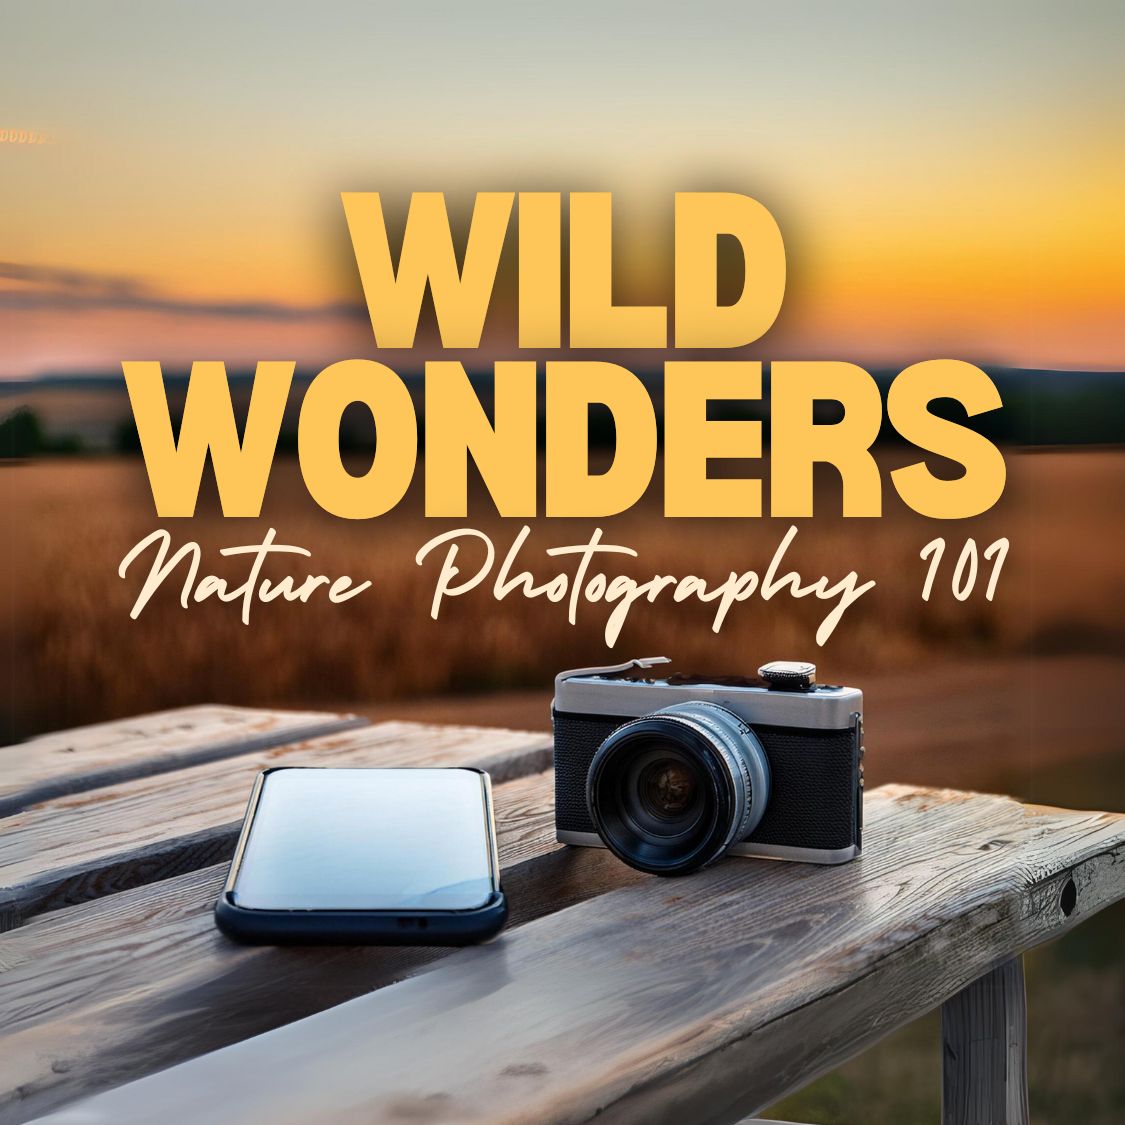 Title of program, Wild Wonders, and theme, Nature Photography 101. Camera and phone in nature are added to show theme.